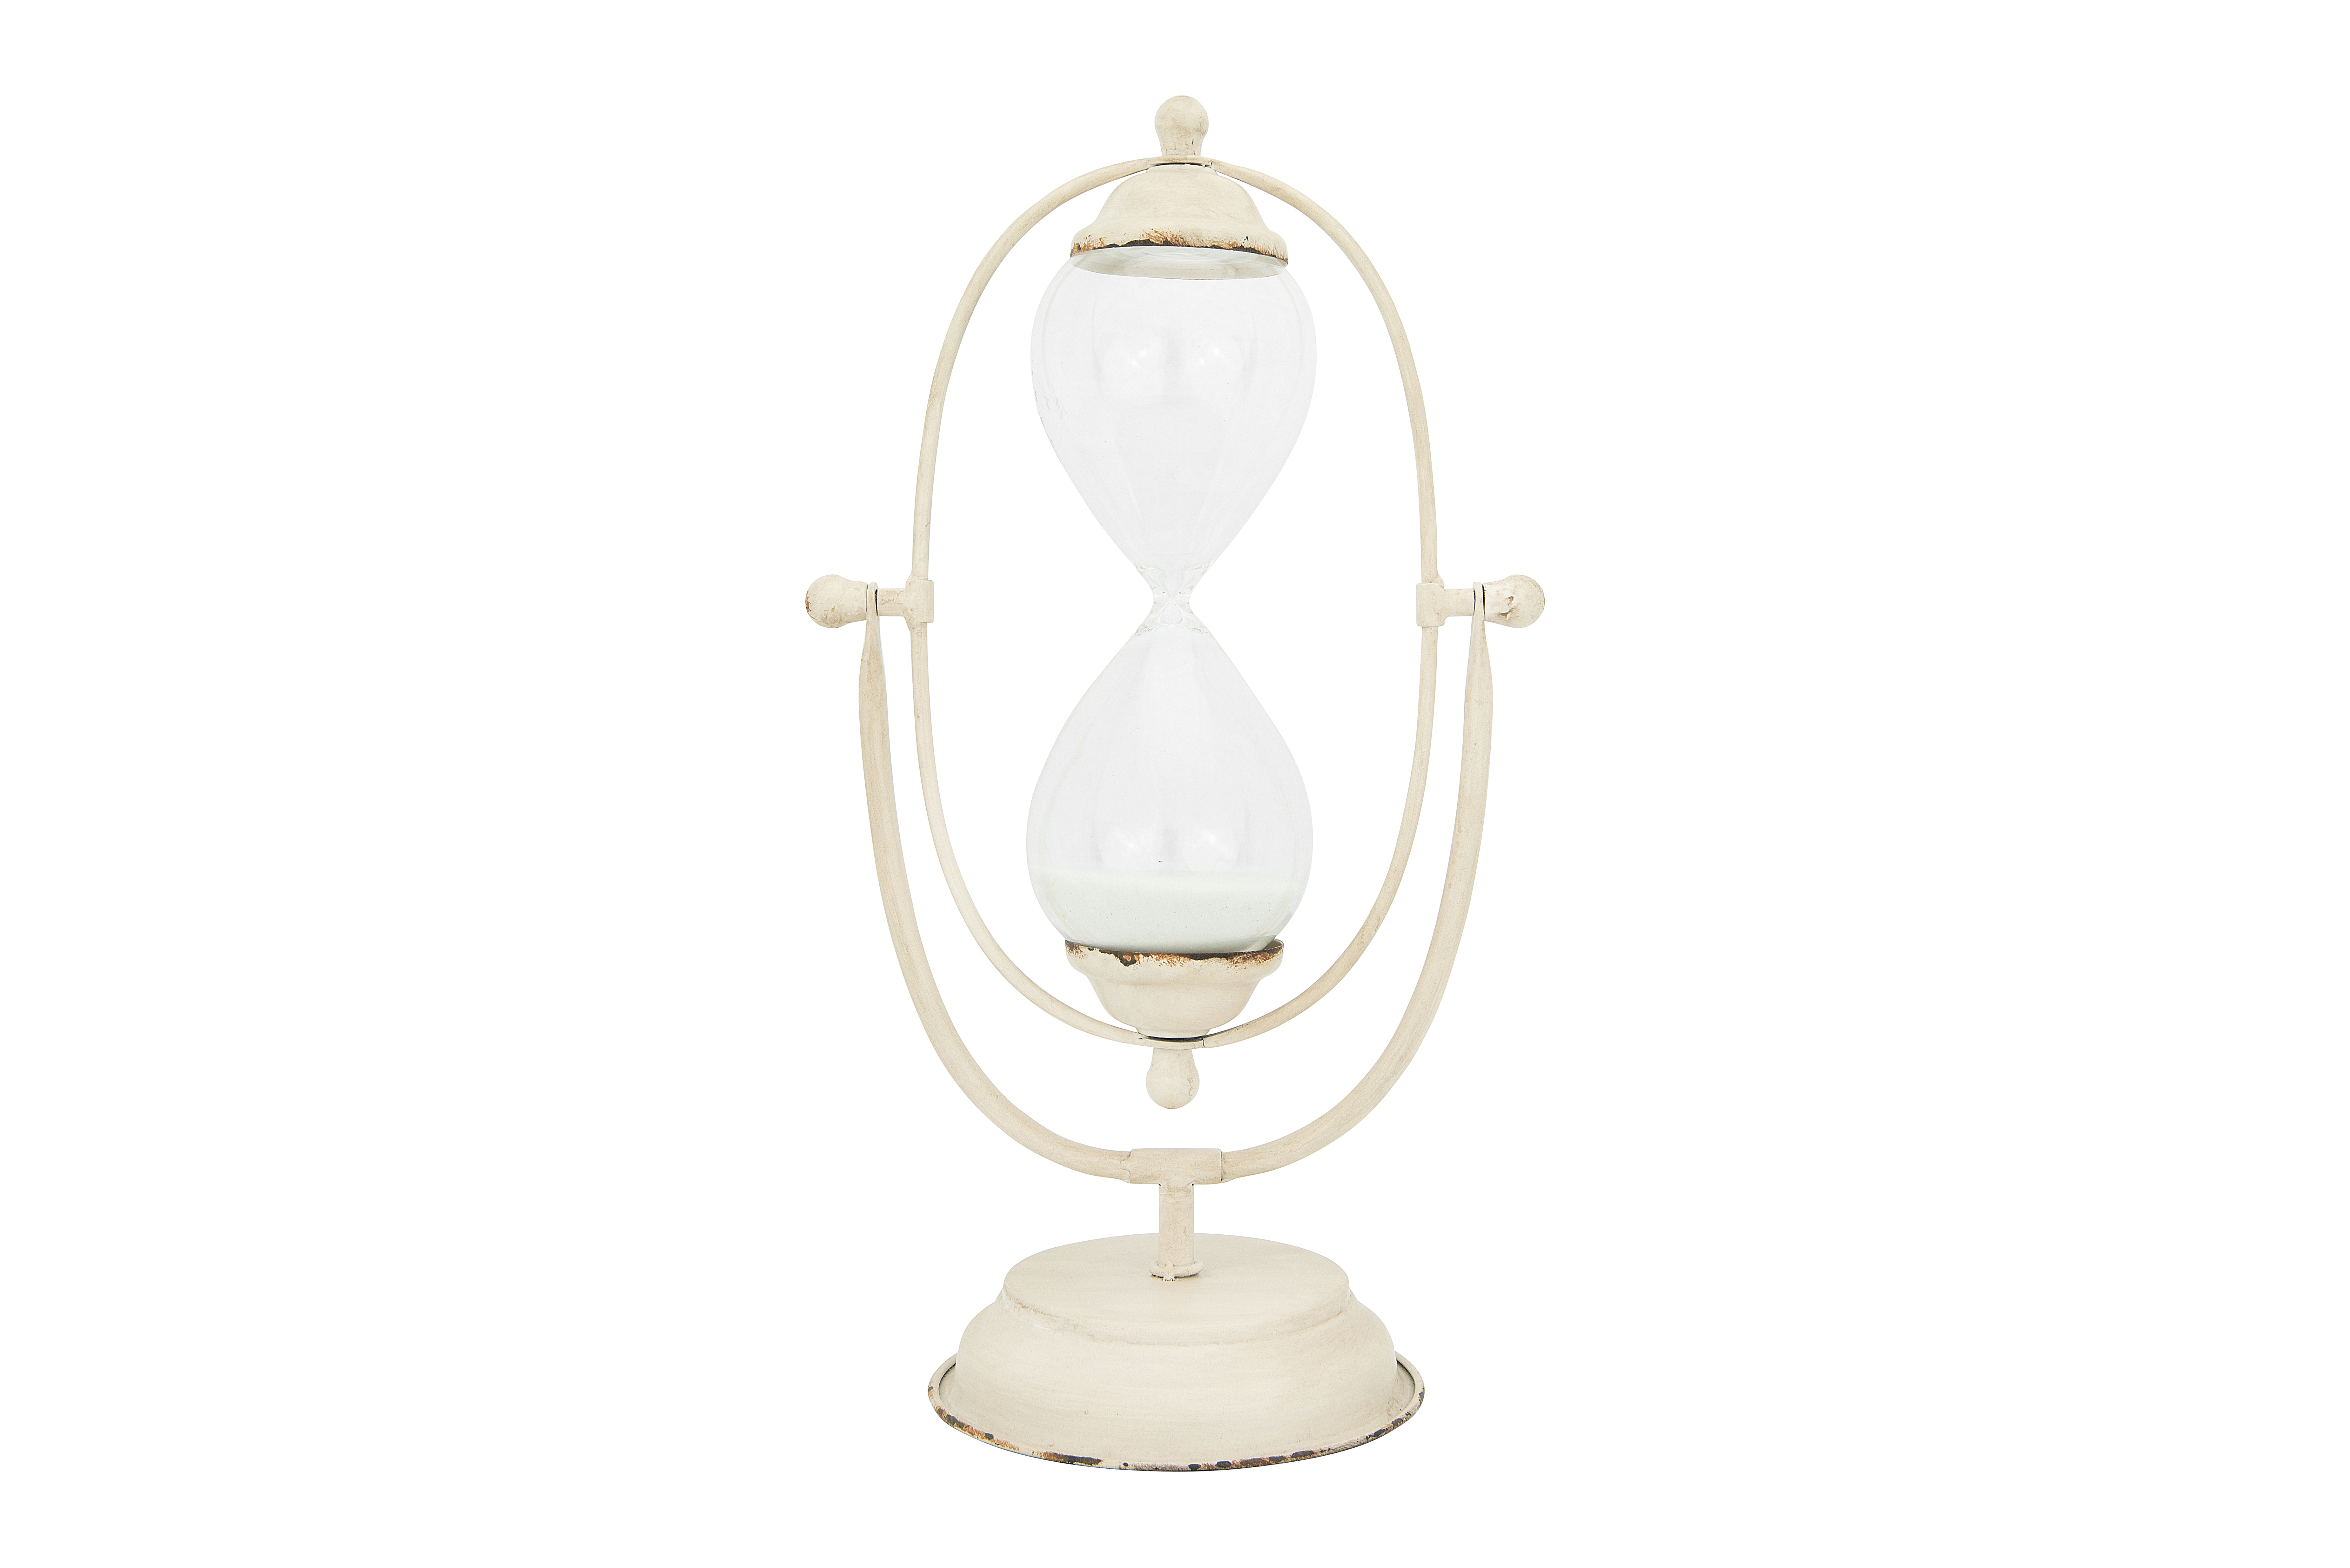 Decorative Antique Cream Metal Hourglass with White Sand - Nomad Home